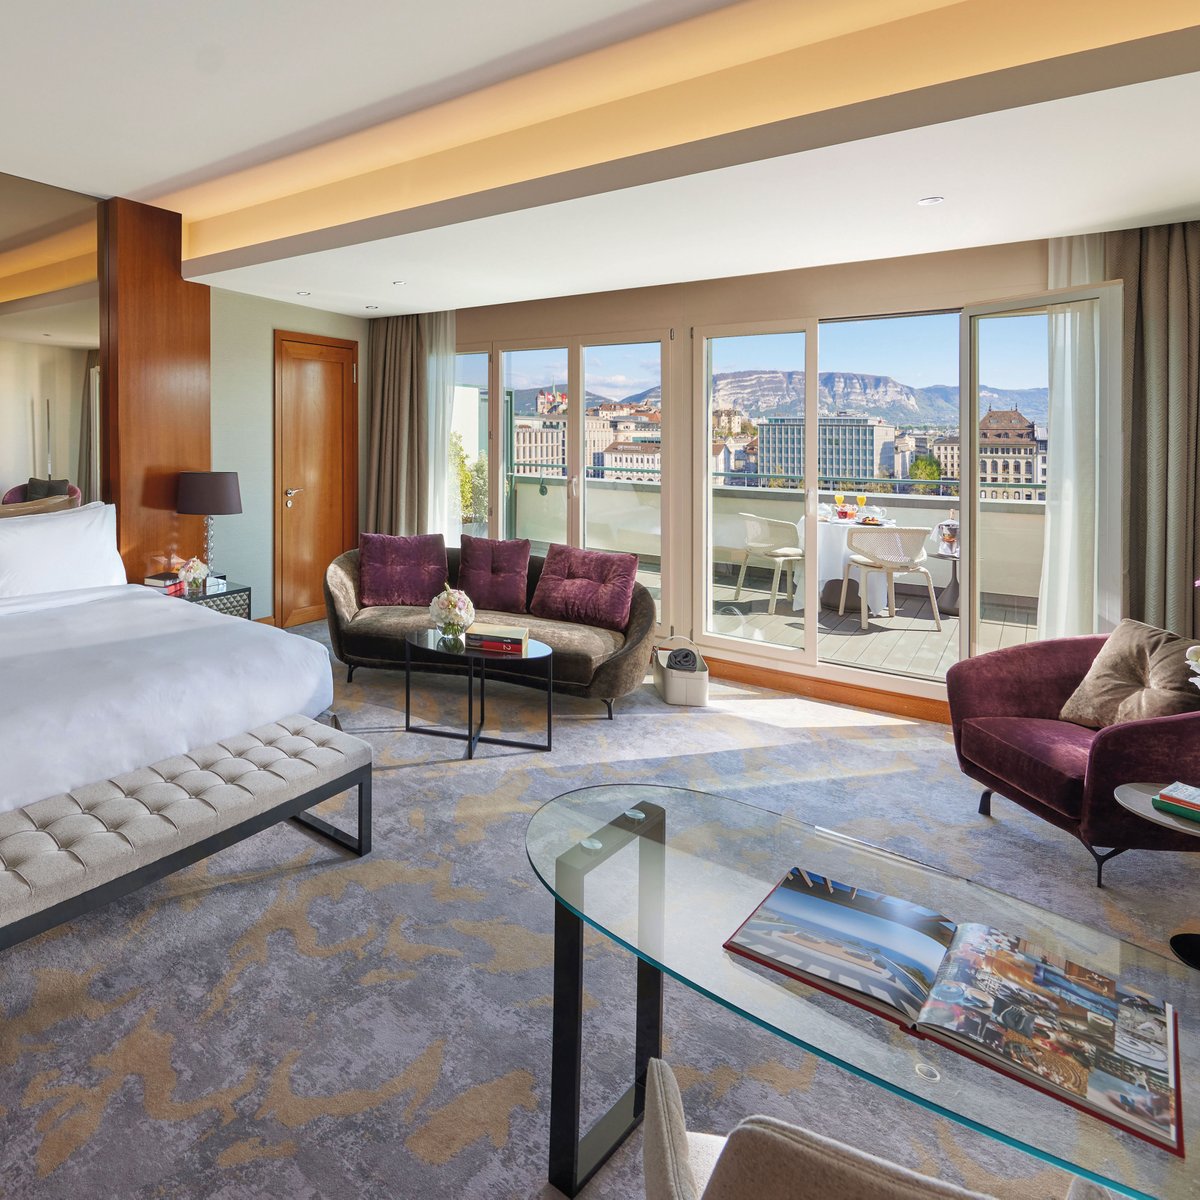 Step into the weekend from @MO_GENEVA's newly renovated rooms. Savour a delicious breakfast while enjoying breathtaking views of the Jura mountains, Geneva’s cityscape, and the tranquil Rhône River. Book now: ow.ly/1mMo50PEsXZ #ImAFan